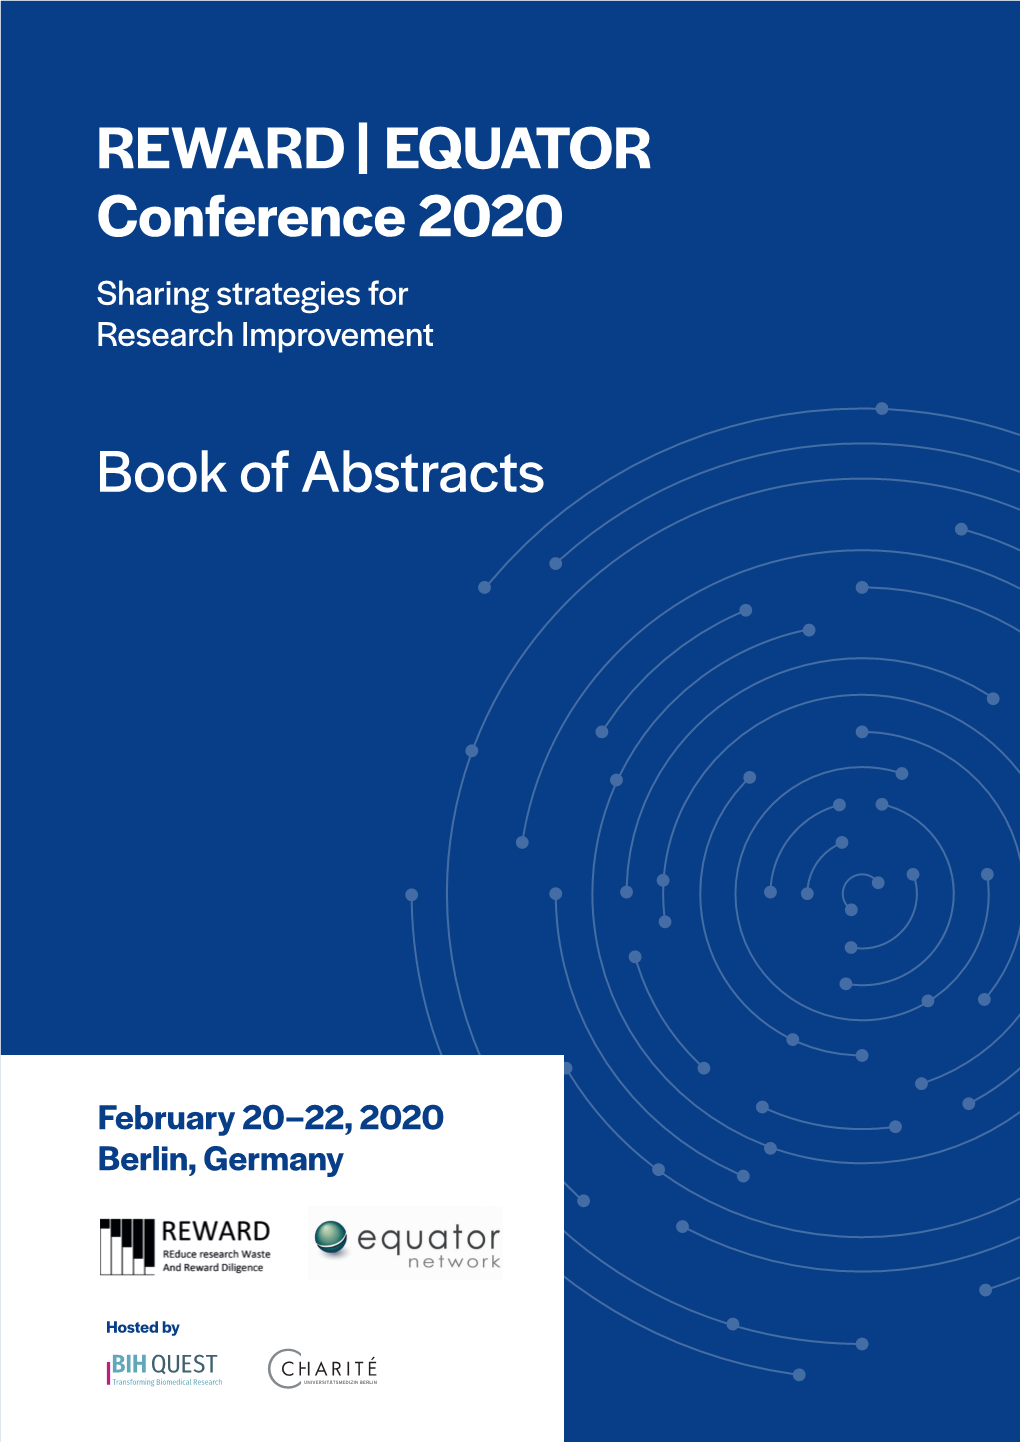 REWARD | EQUATOR Conference 2020 Book of Abstracts